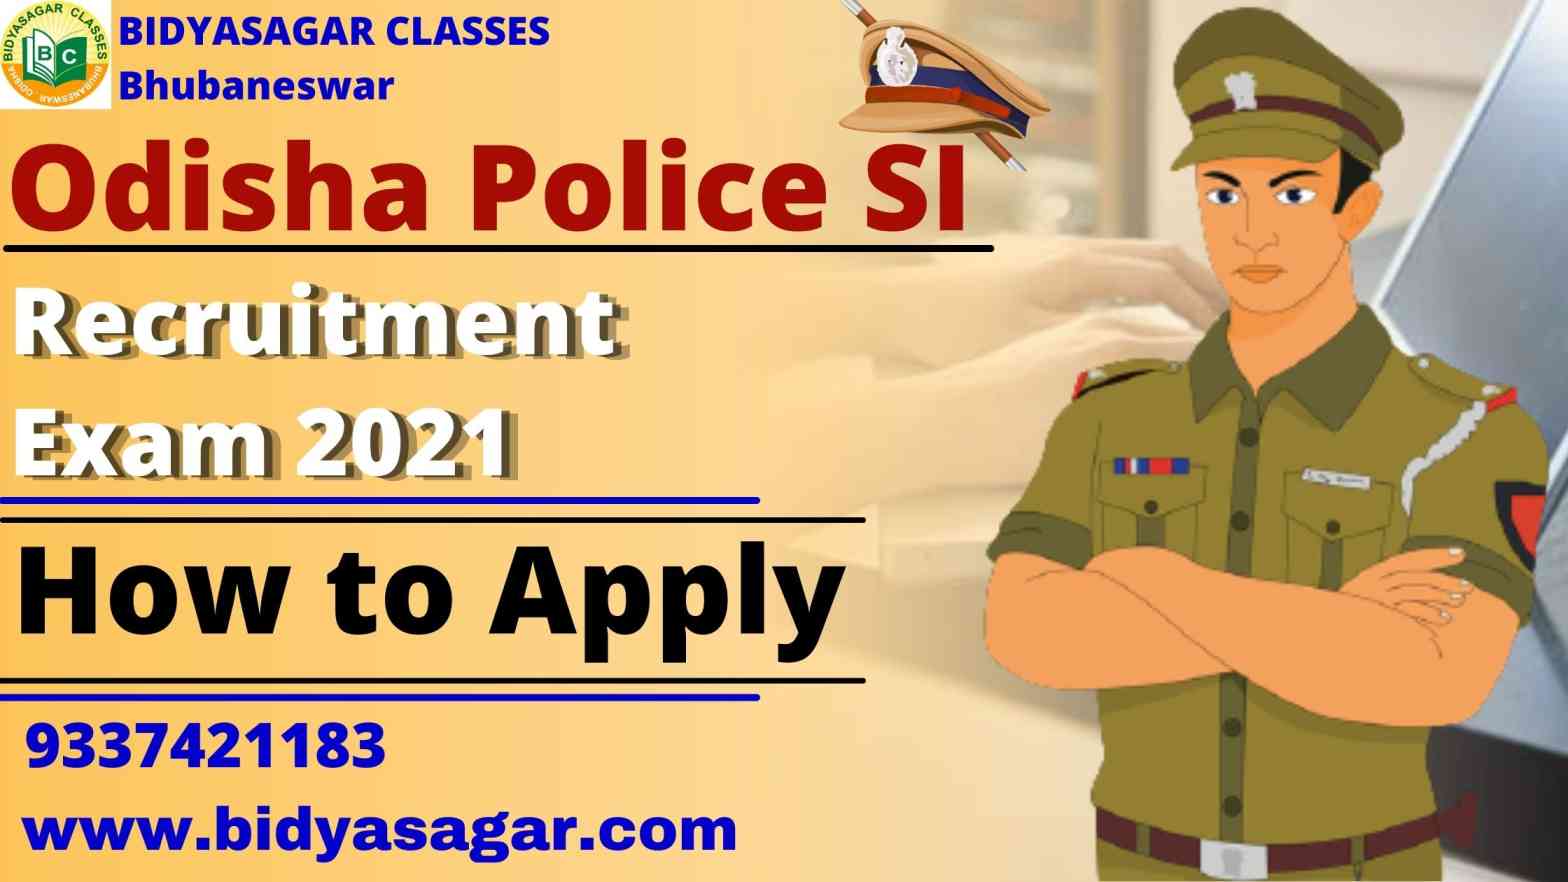 How to apply for Odisha Police SI Recruitment 2021?